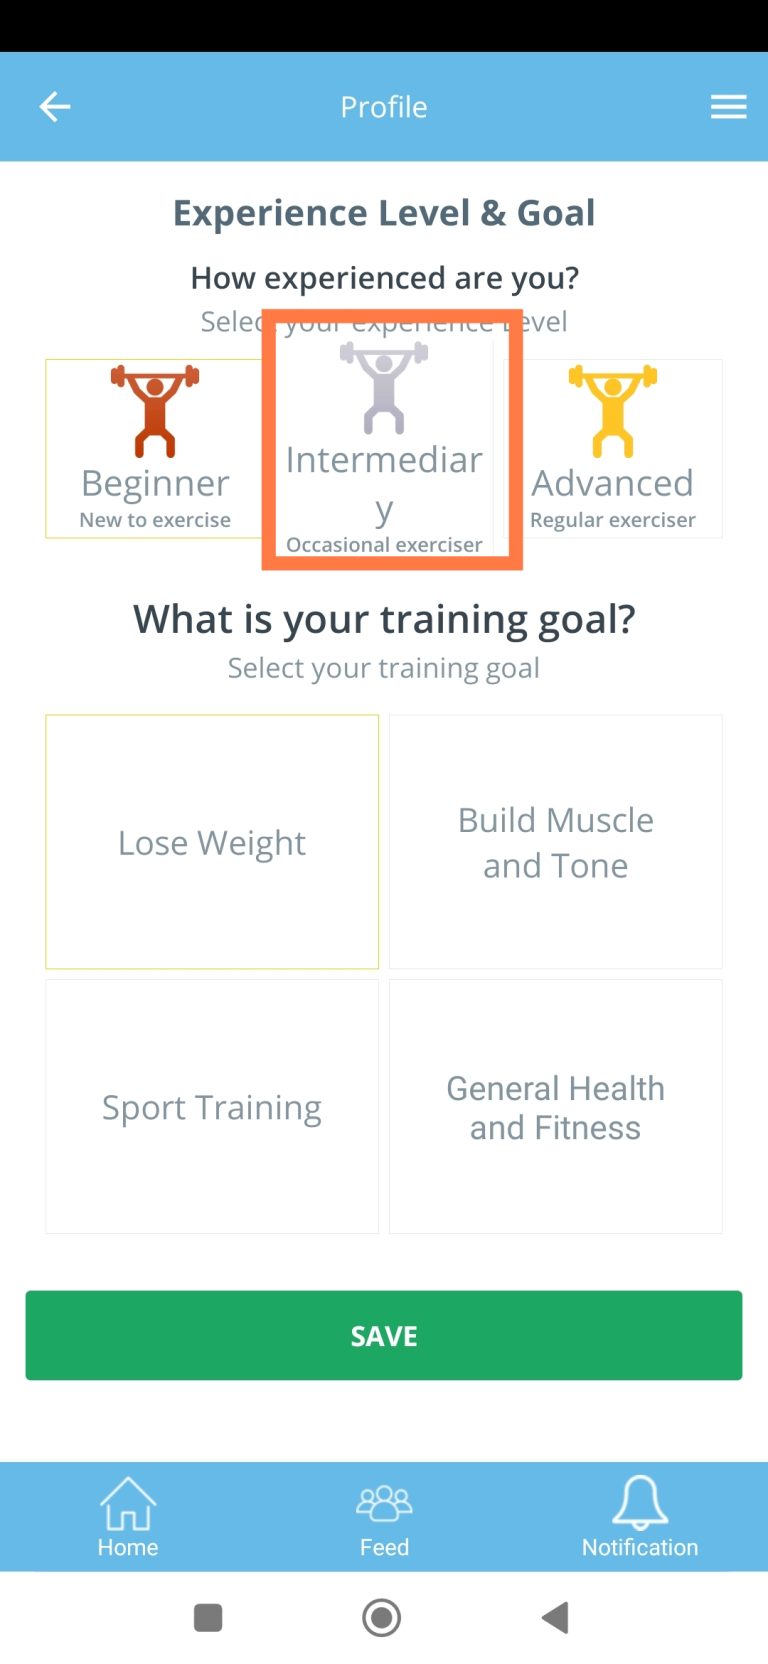 Word ‘Intermediary’ is not displayed in one row on ‘Experience Level & Goal’ page